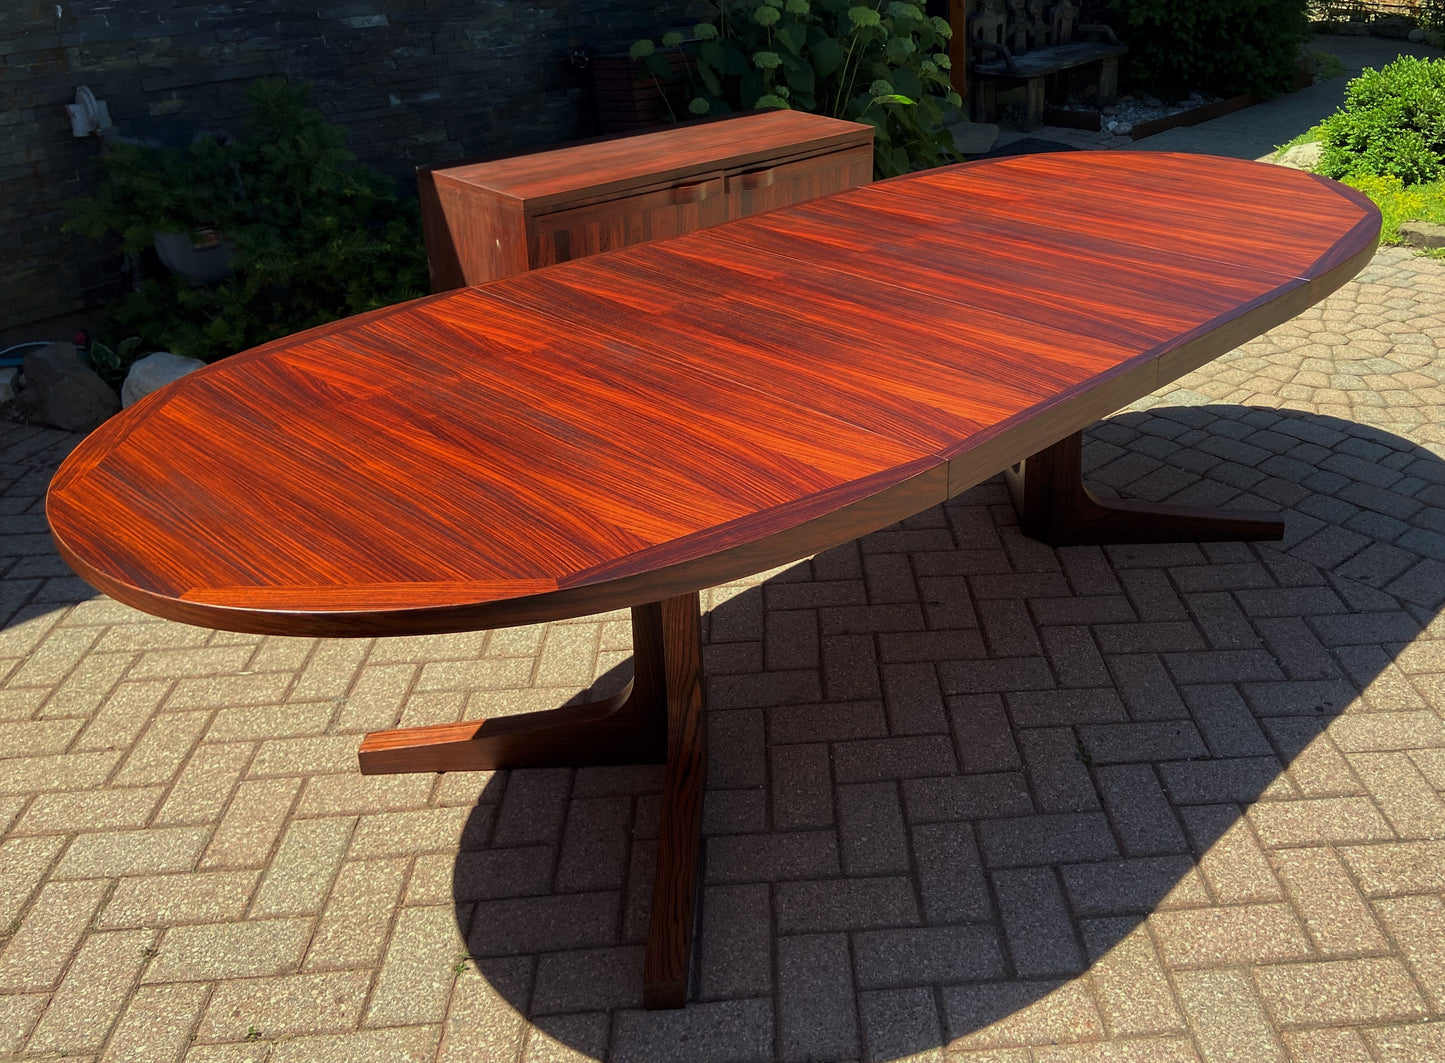 REFINISHED Danish Mid Century Modern Rosewood Table w 2 Leaves by Dyrlund, 64"-103.5"